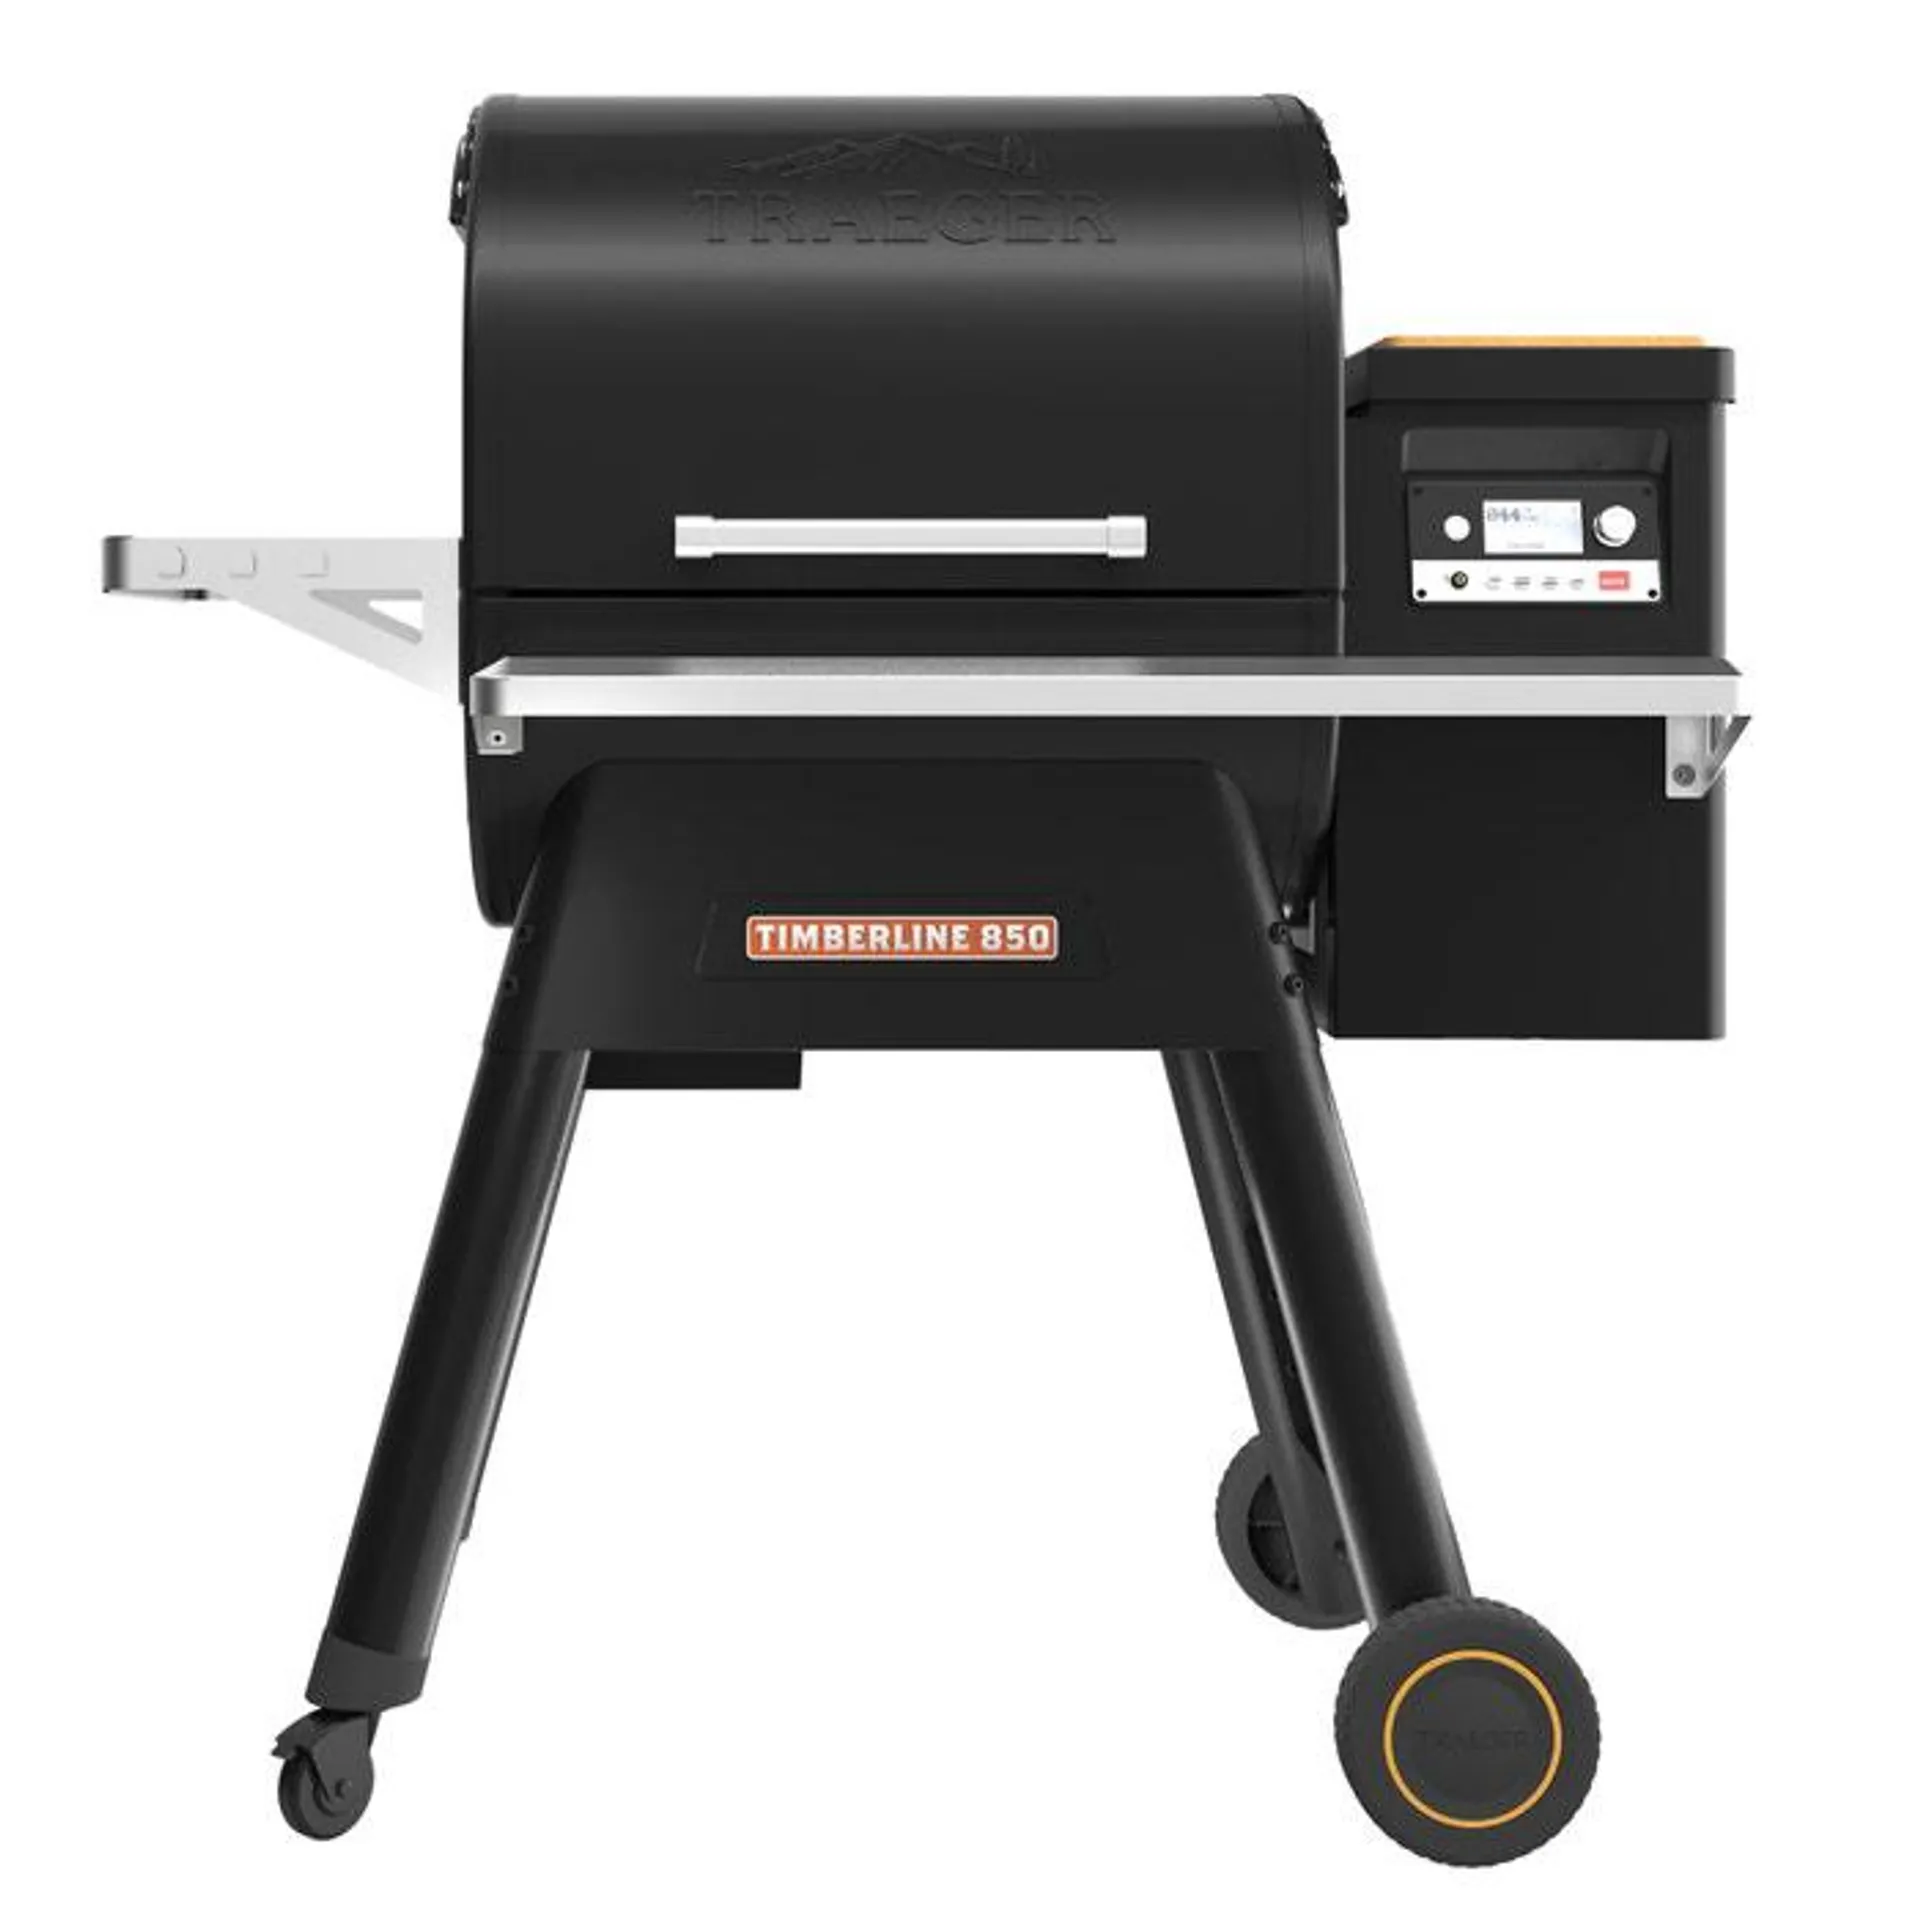 Traeger Timberline 850 Wood Pellet Grill (Includes Cover and Pellets)